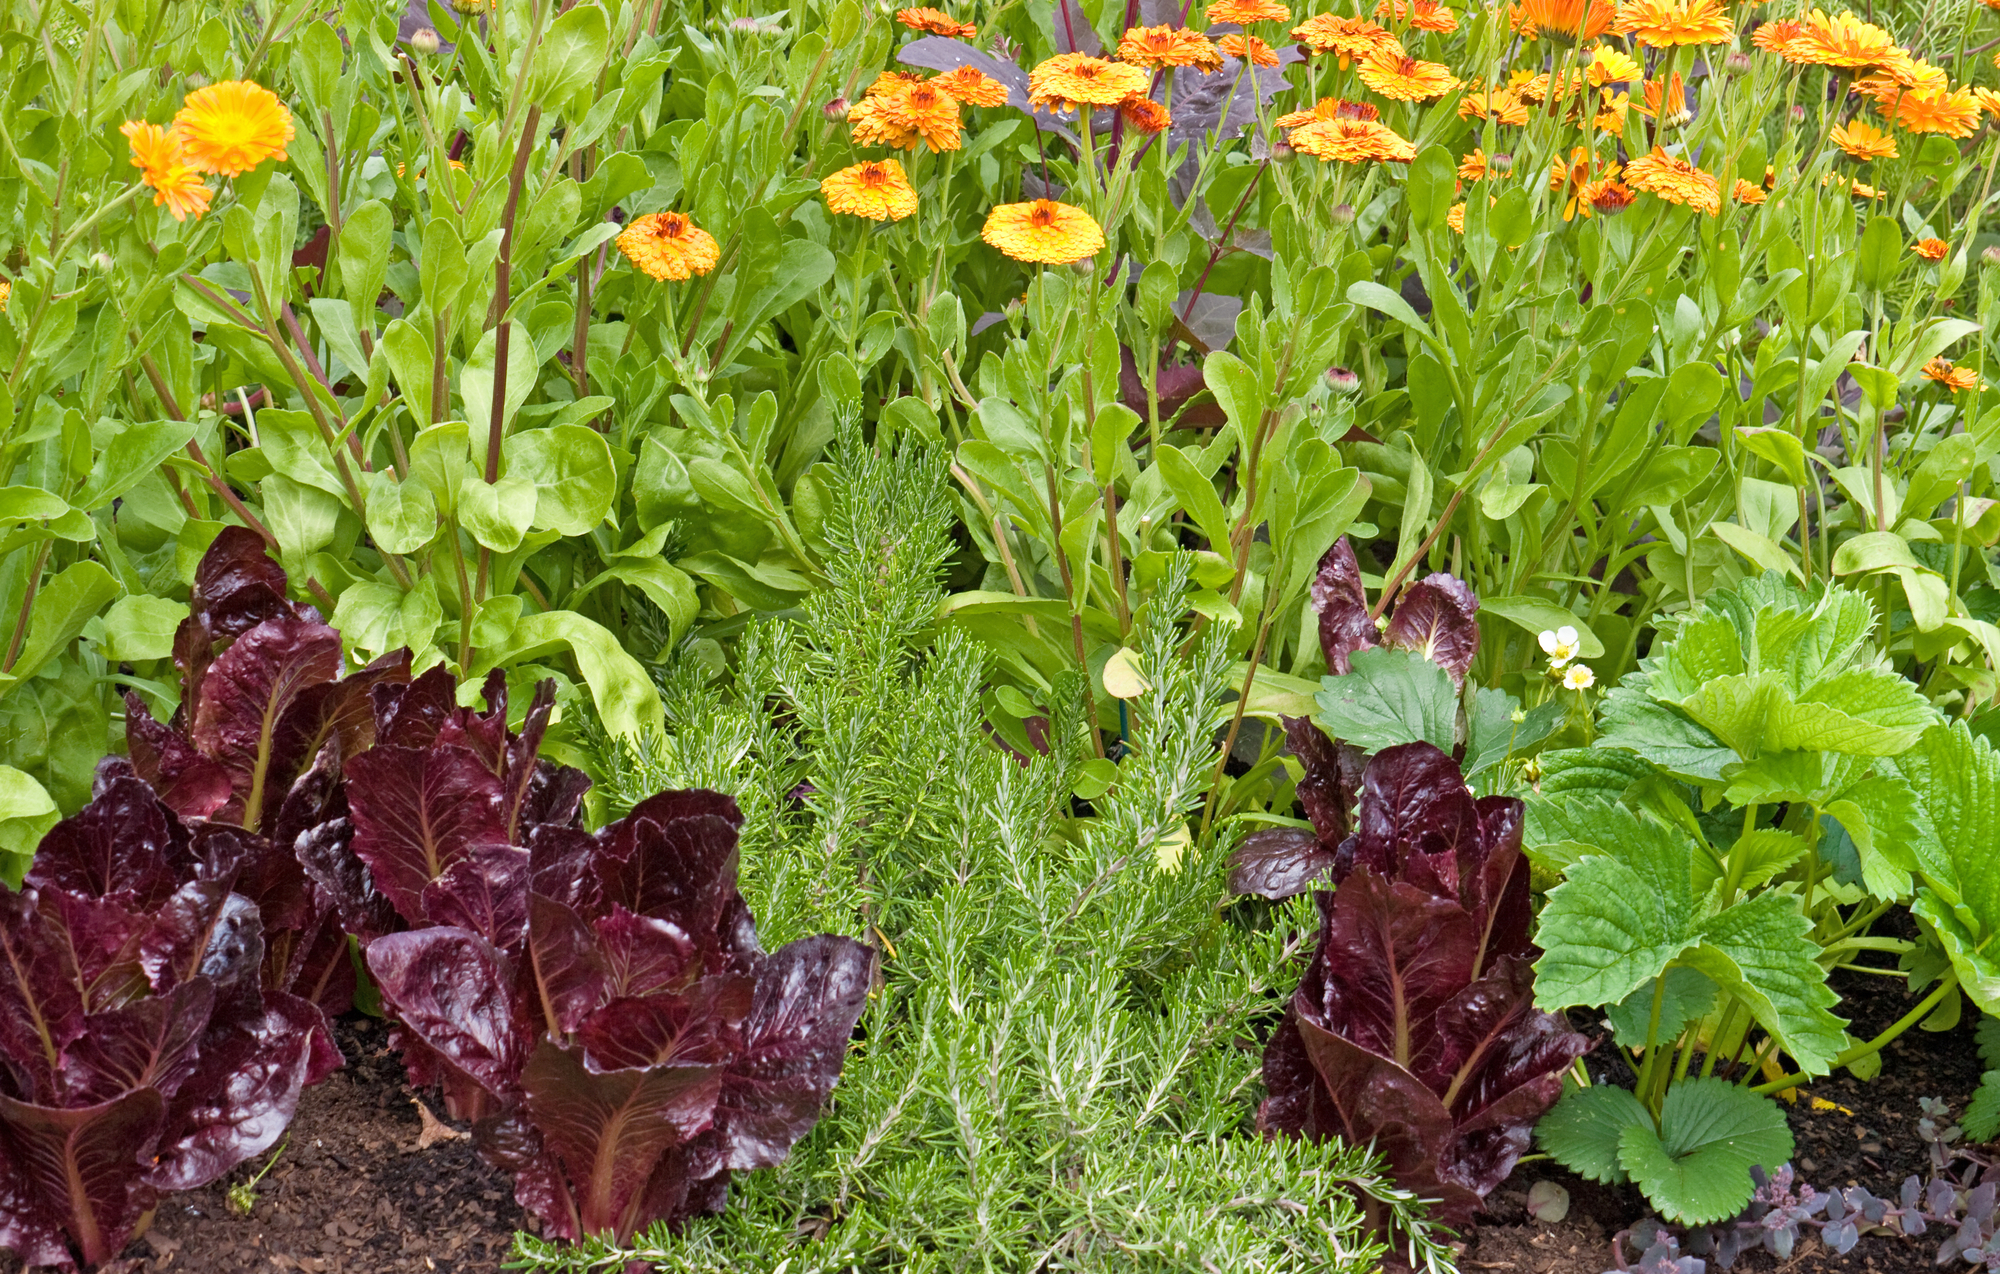 marigolds mixed into a planting of red lettuce, rosemary and other garden plants and 